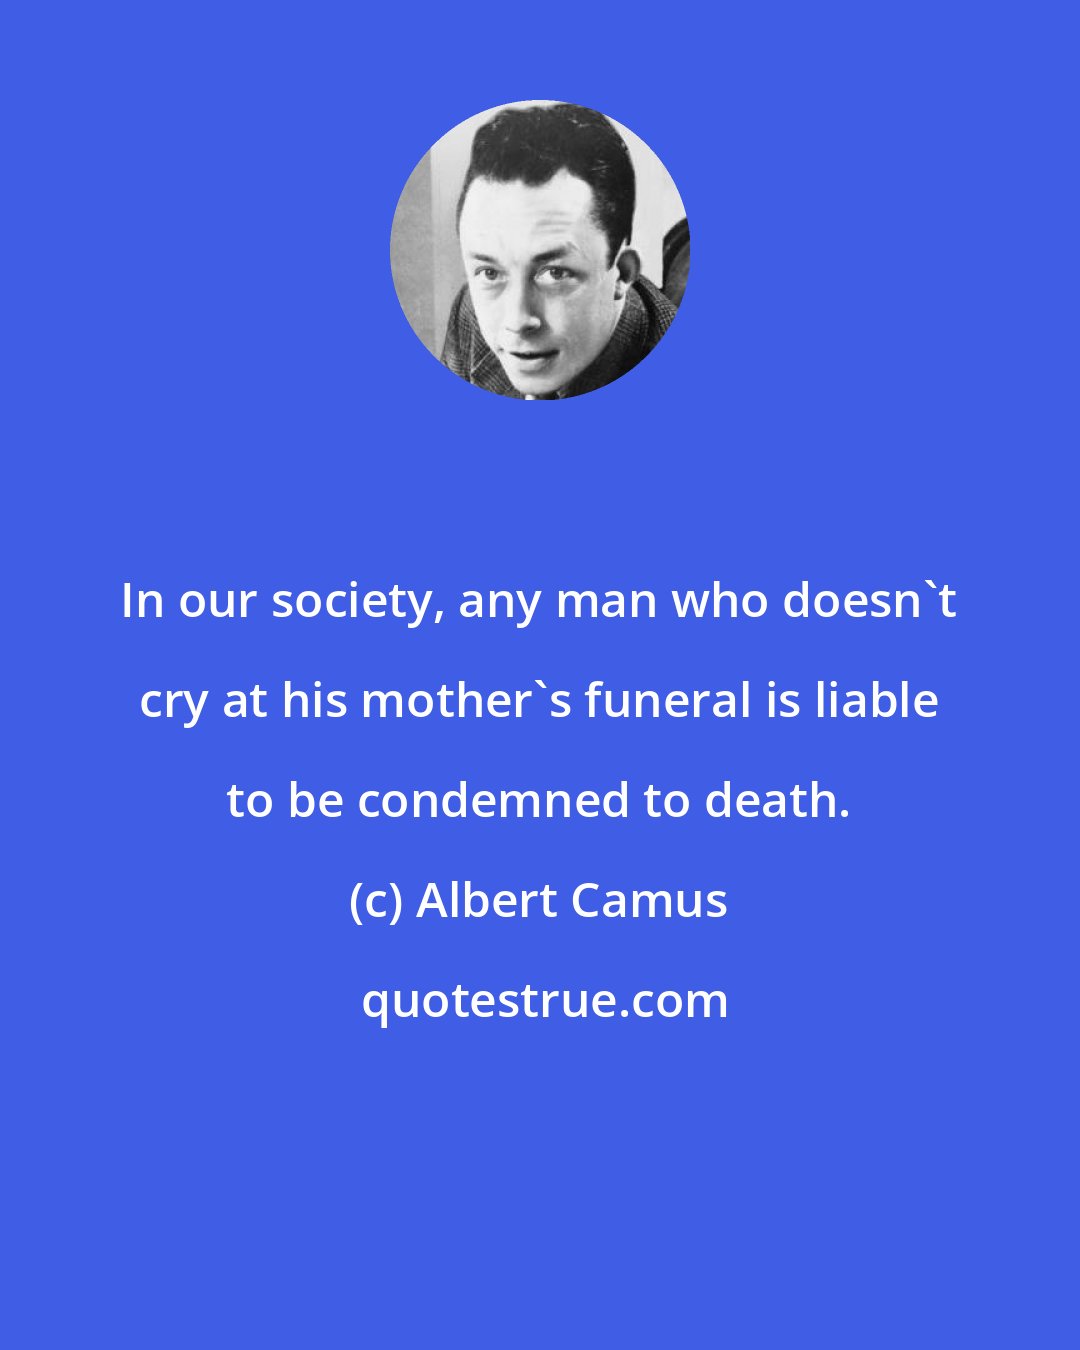 Albert Camus: In our society, any man who doesn't cry at his mother's funeral is liable to be condemned to death.